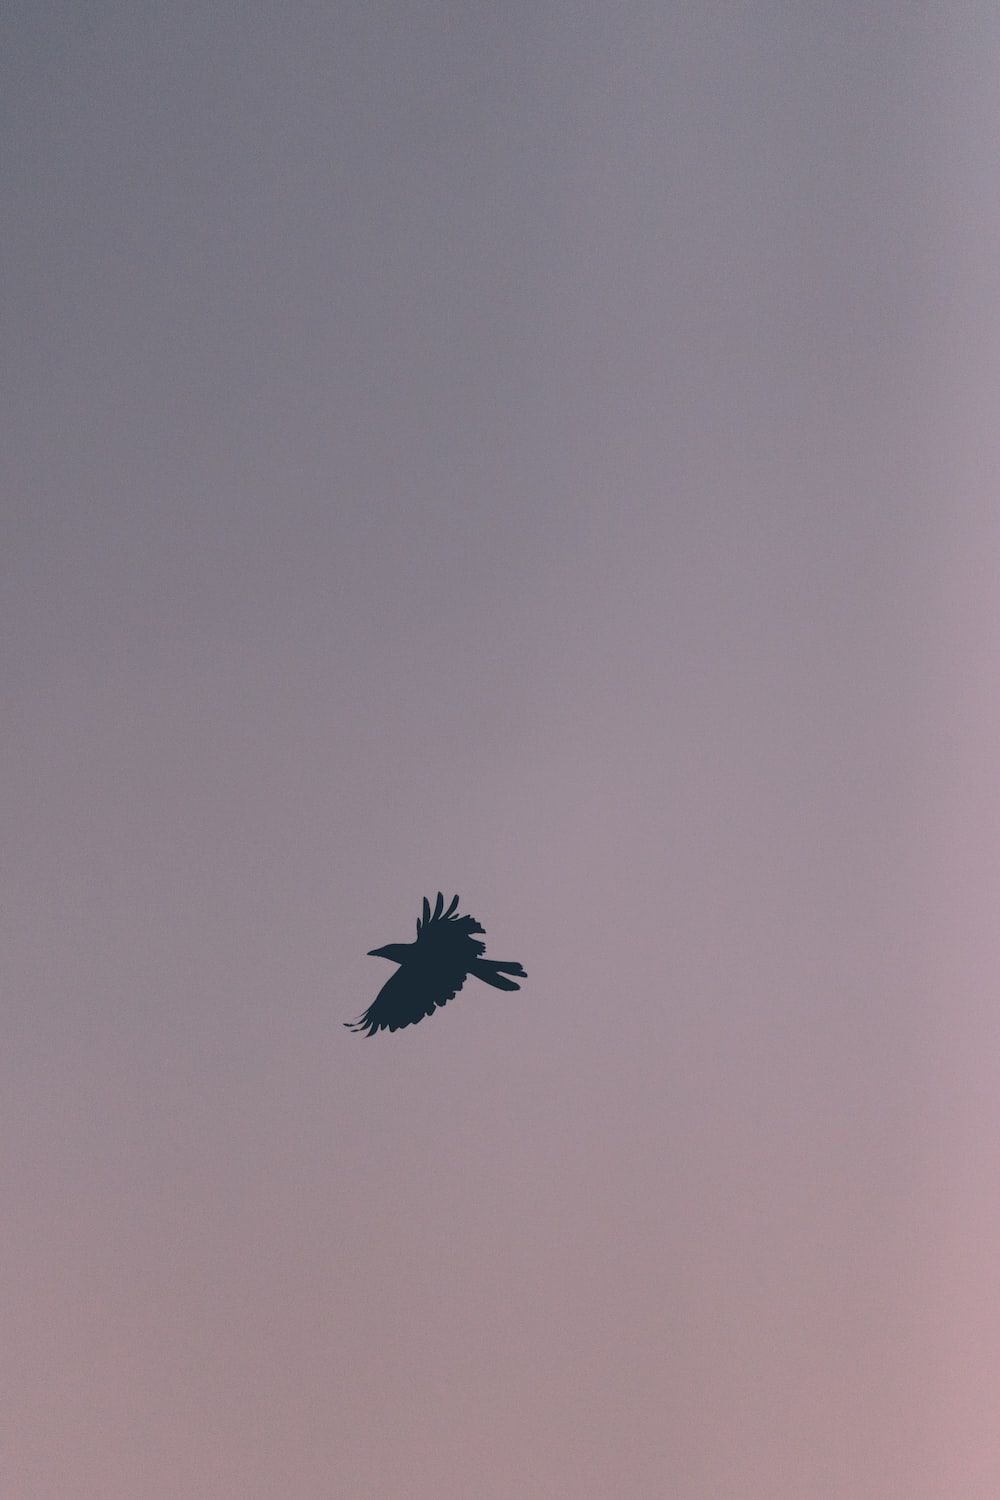 A bird flying in the sky at sunset - 